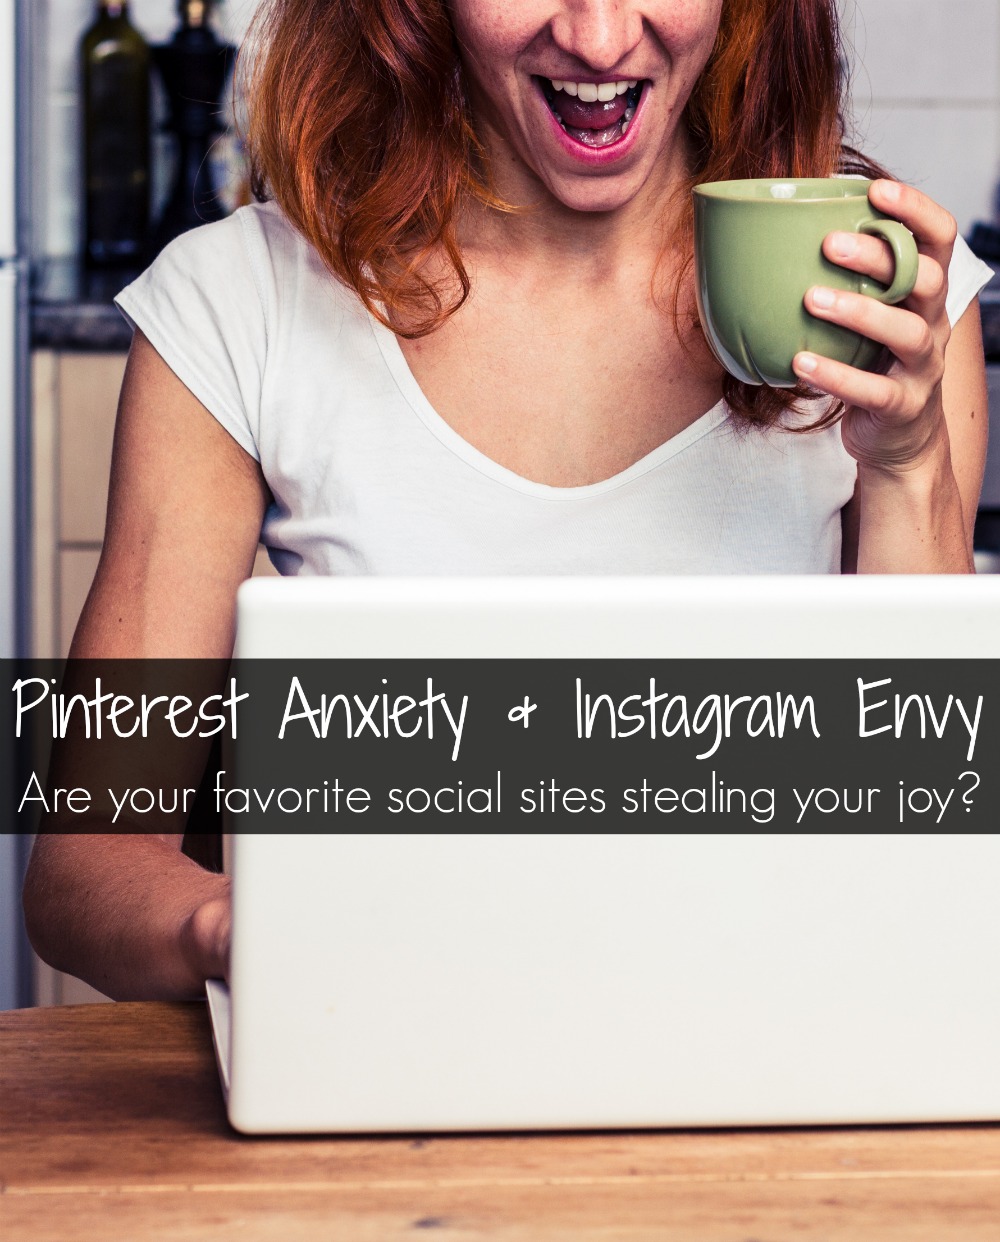 Pinterest Anxiety and Instagram Envy